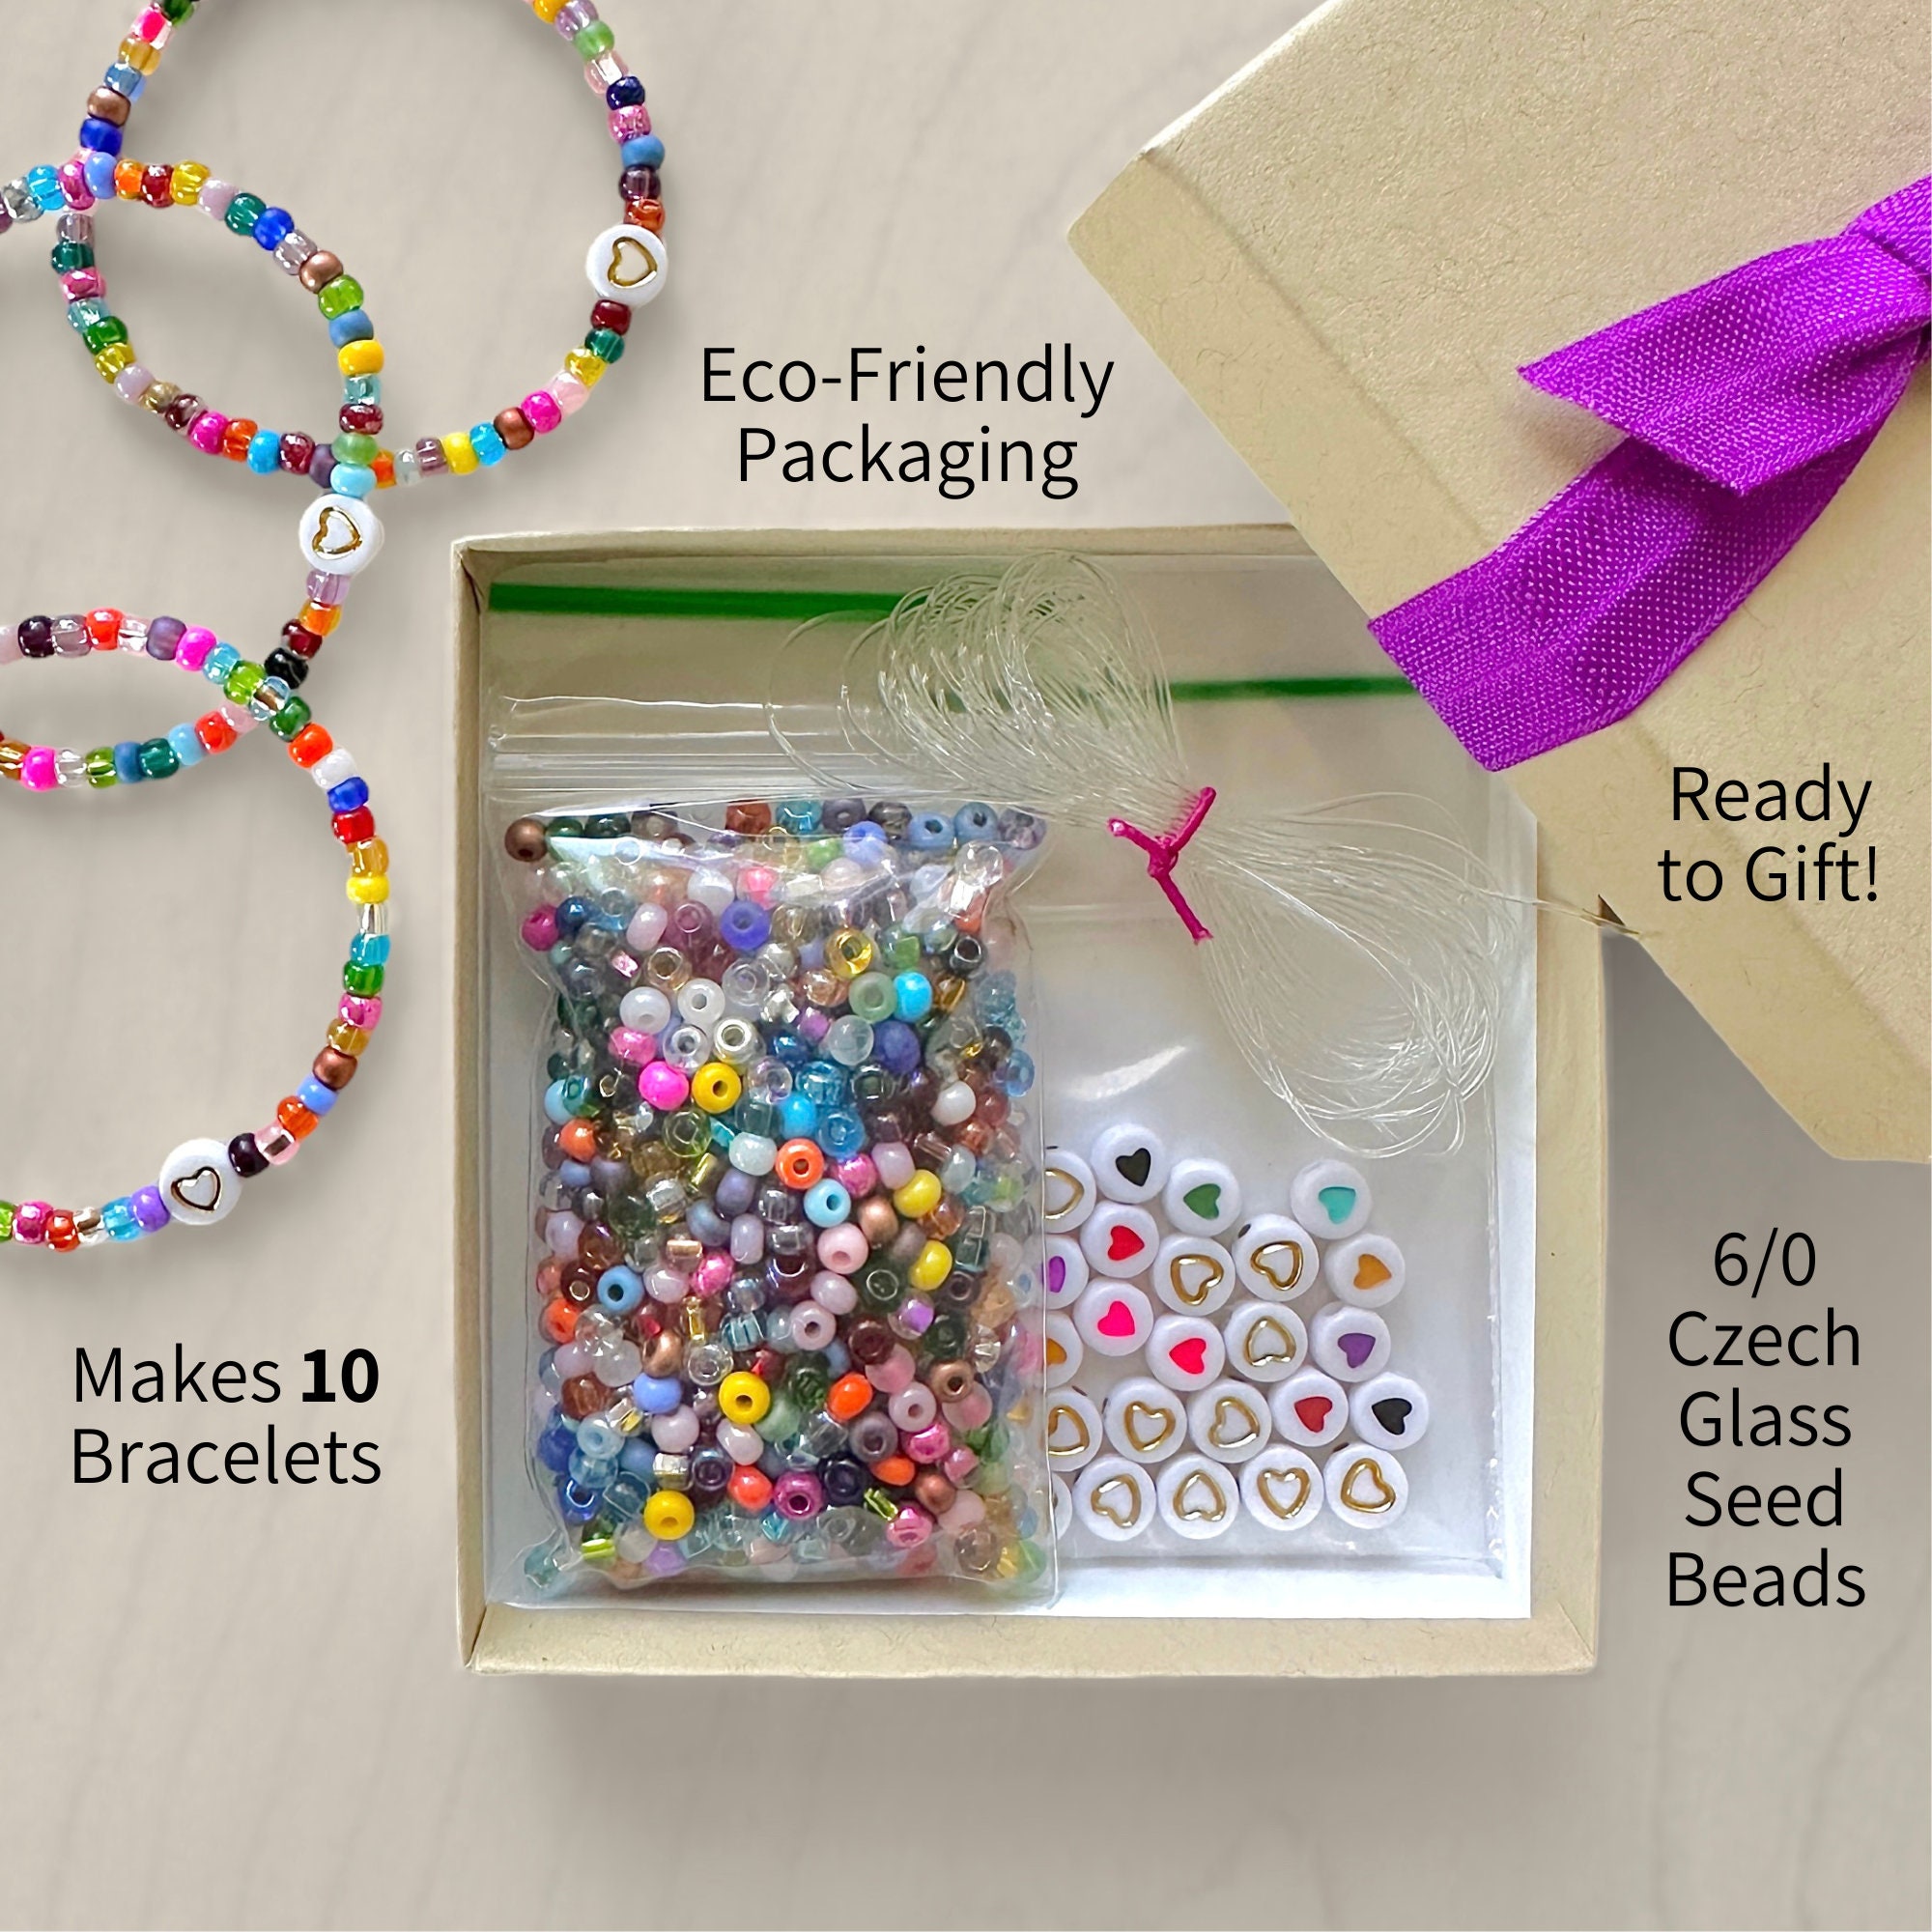 Friendship Bracelet Making kit for Girls, Cute Whale Bracelet Braiding with  10 Colors of Strings, Teen Crafts Travel Activity Jewelry Making Kit